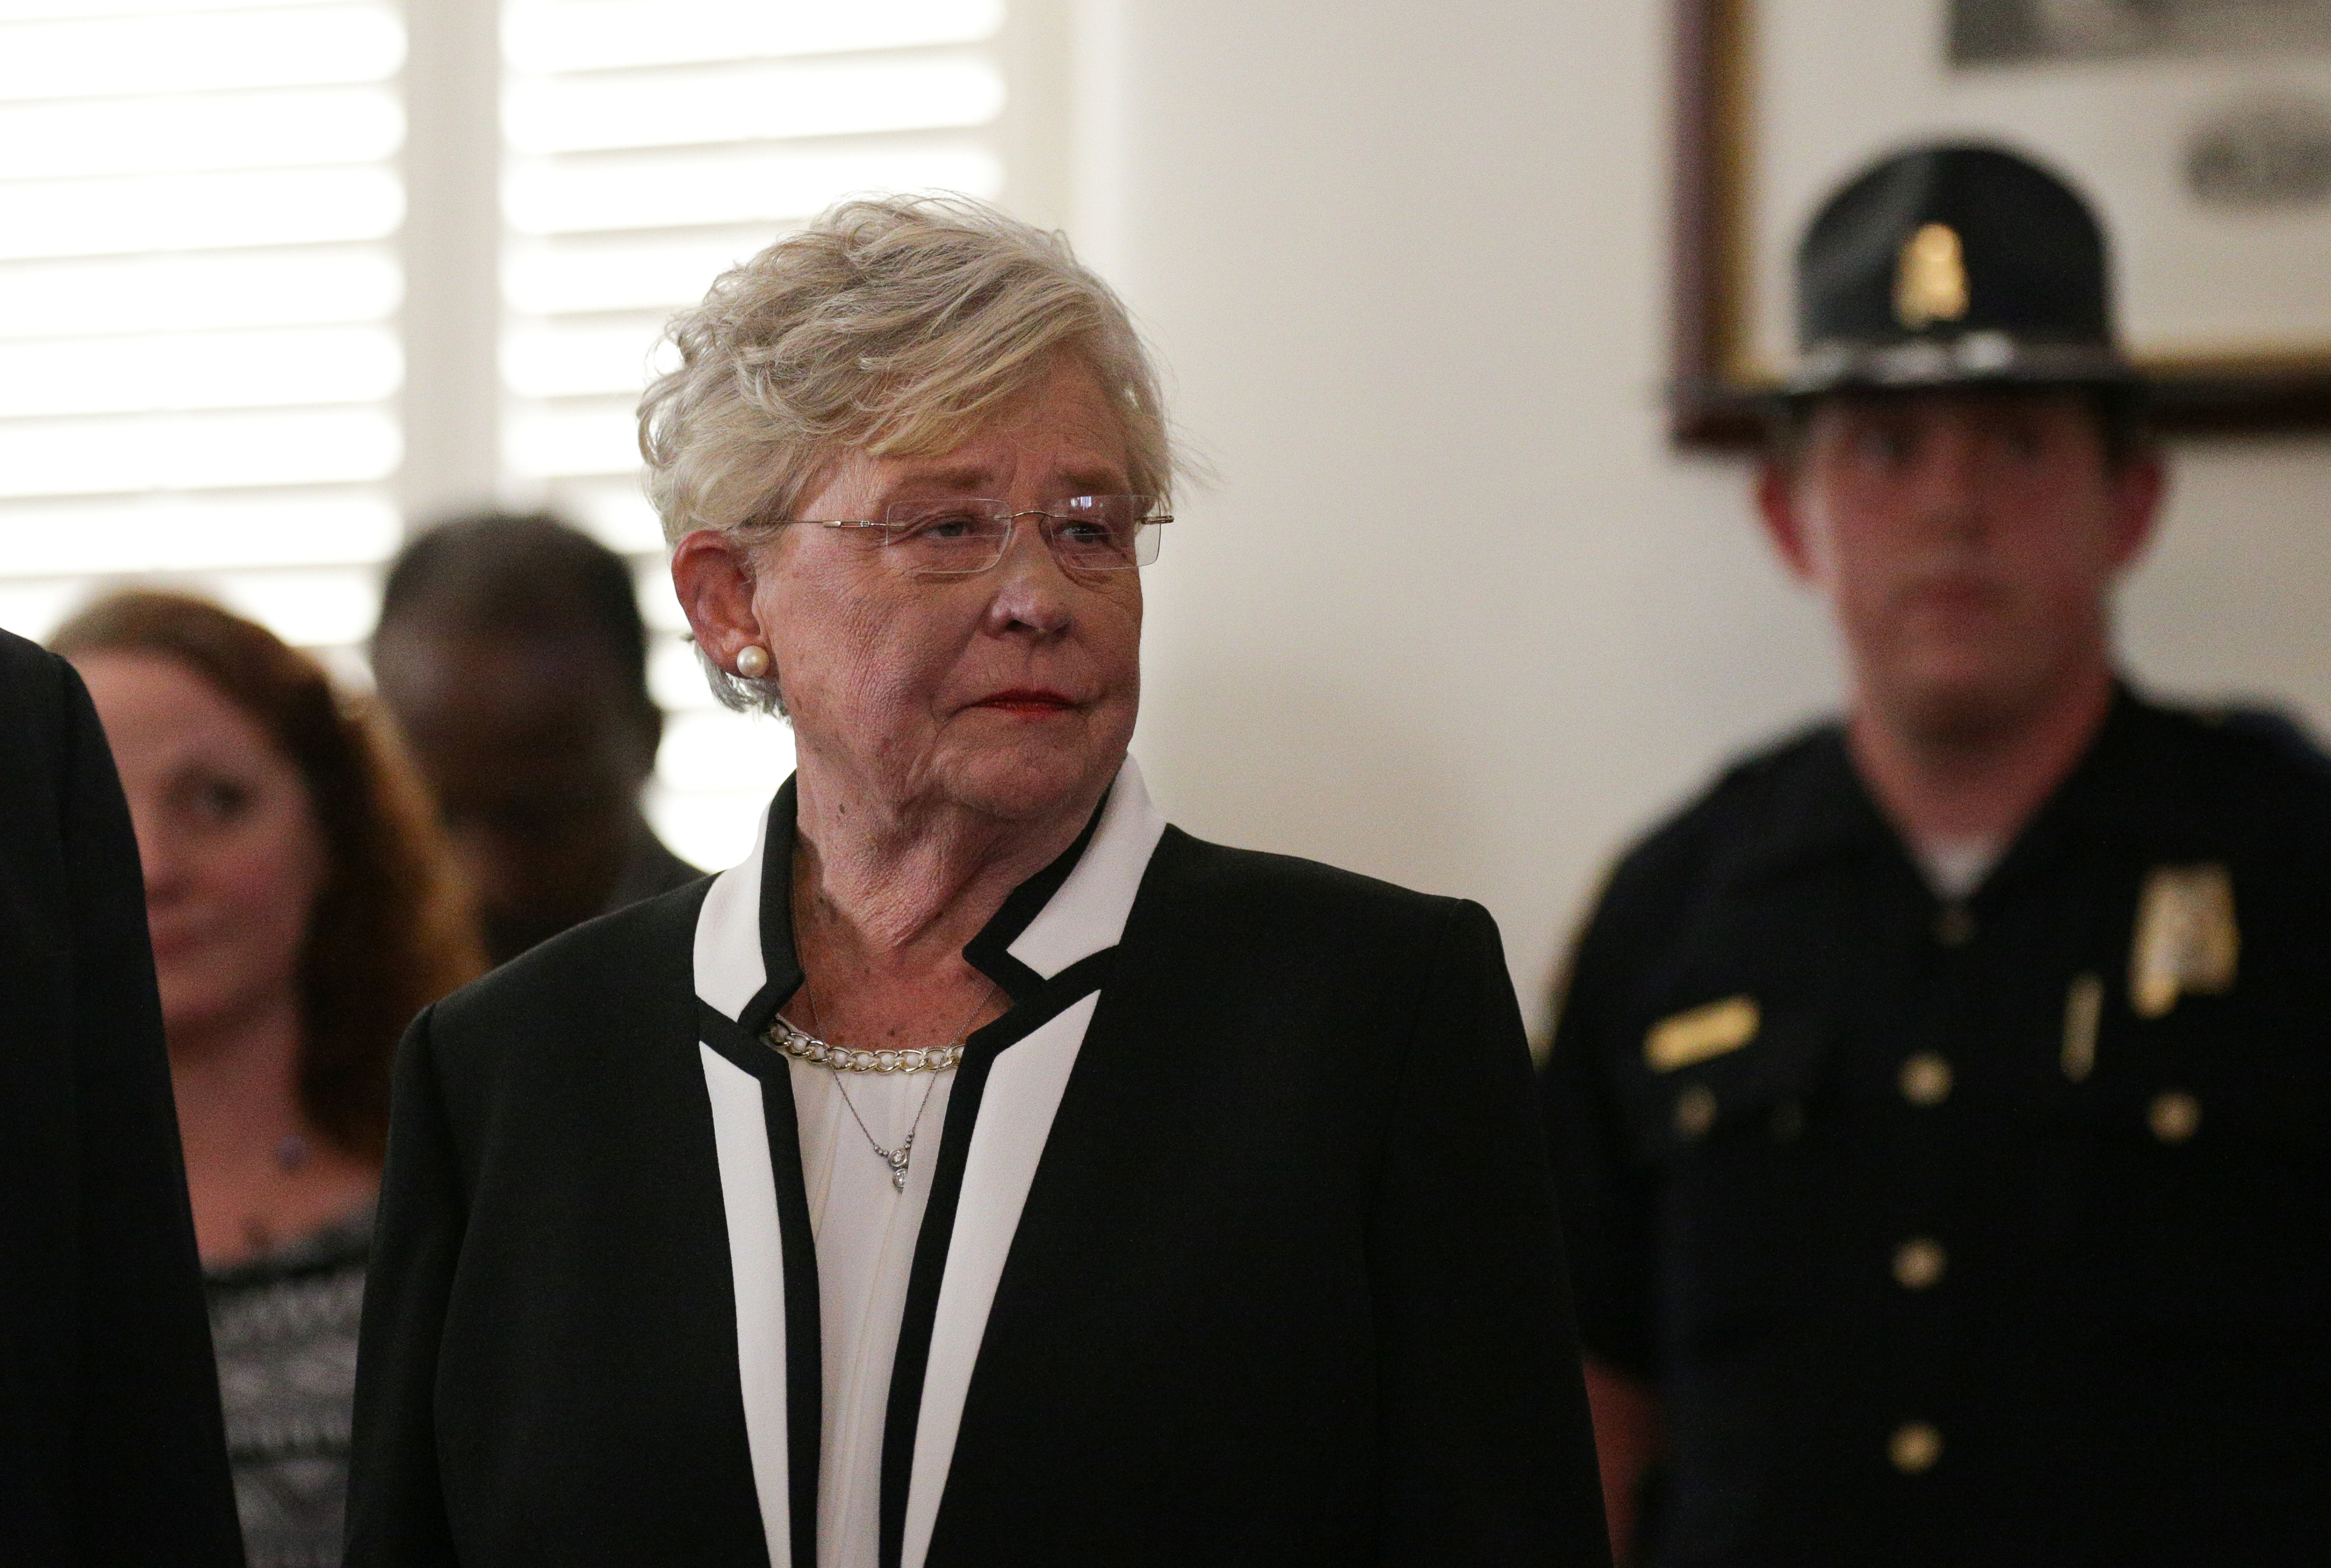 Lt Governor Kay Ivey waits to be sworn in shortly after Alabama Governor Robert Bentley announced his resignation amid impeachment proceedings on accusations stemming from his relationship with a former aide in Montgomery, Alabama, U.S., April 10, 2017. REUTERS/Marvin Gentry